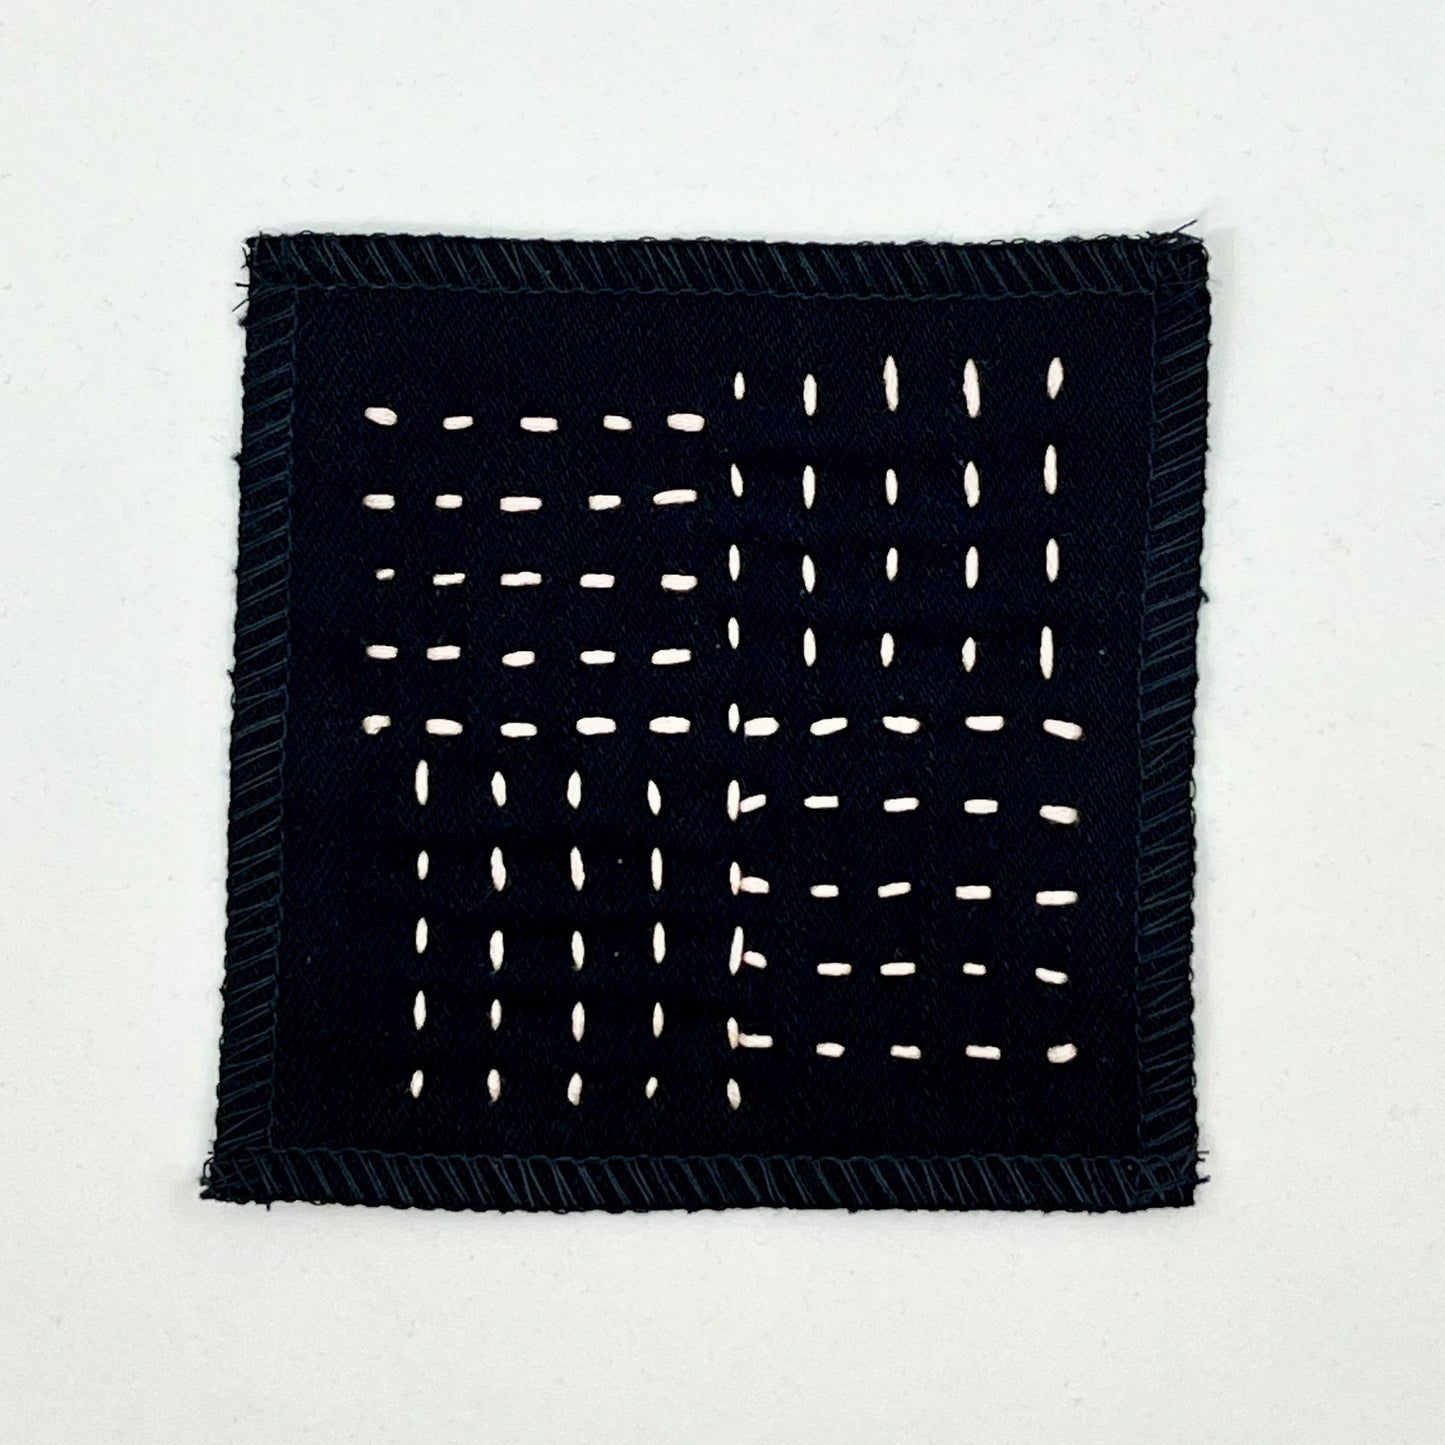 a square black denim patch hand stitched in peach with sashiko style running stitches in the pattern of a basket weave on a white background